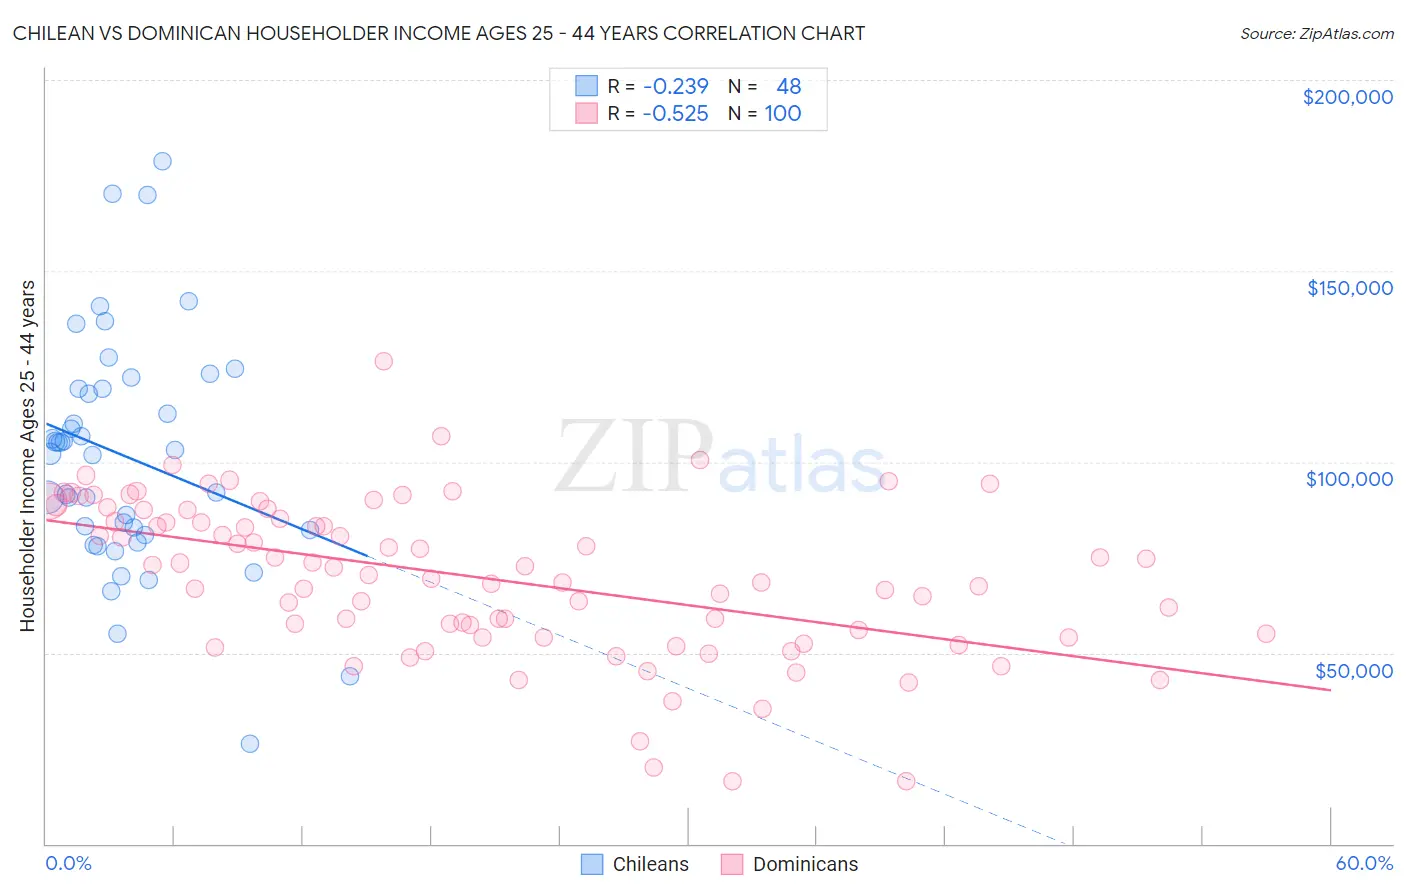 Chilean vs Dominican Householder Income Ages 25 - 44 years